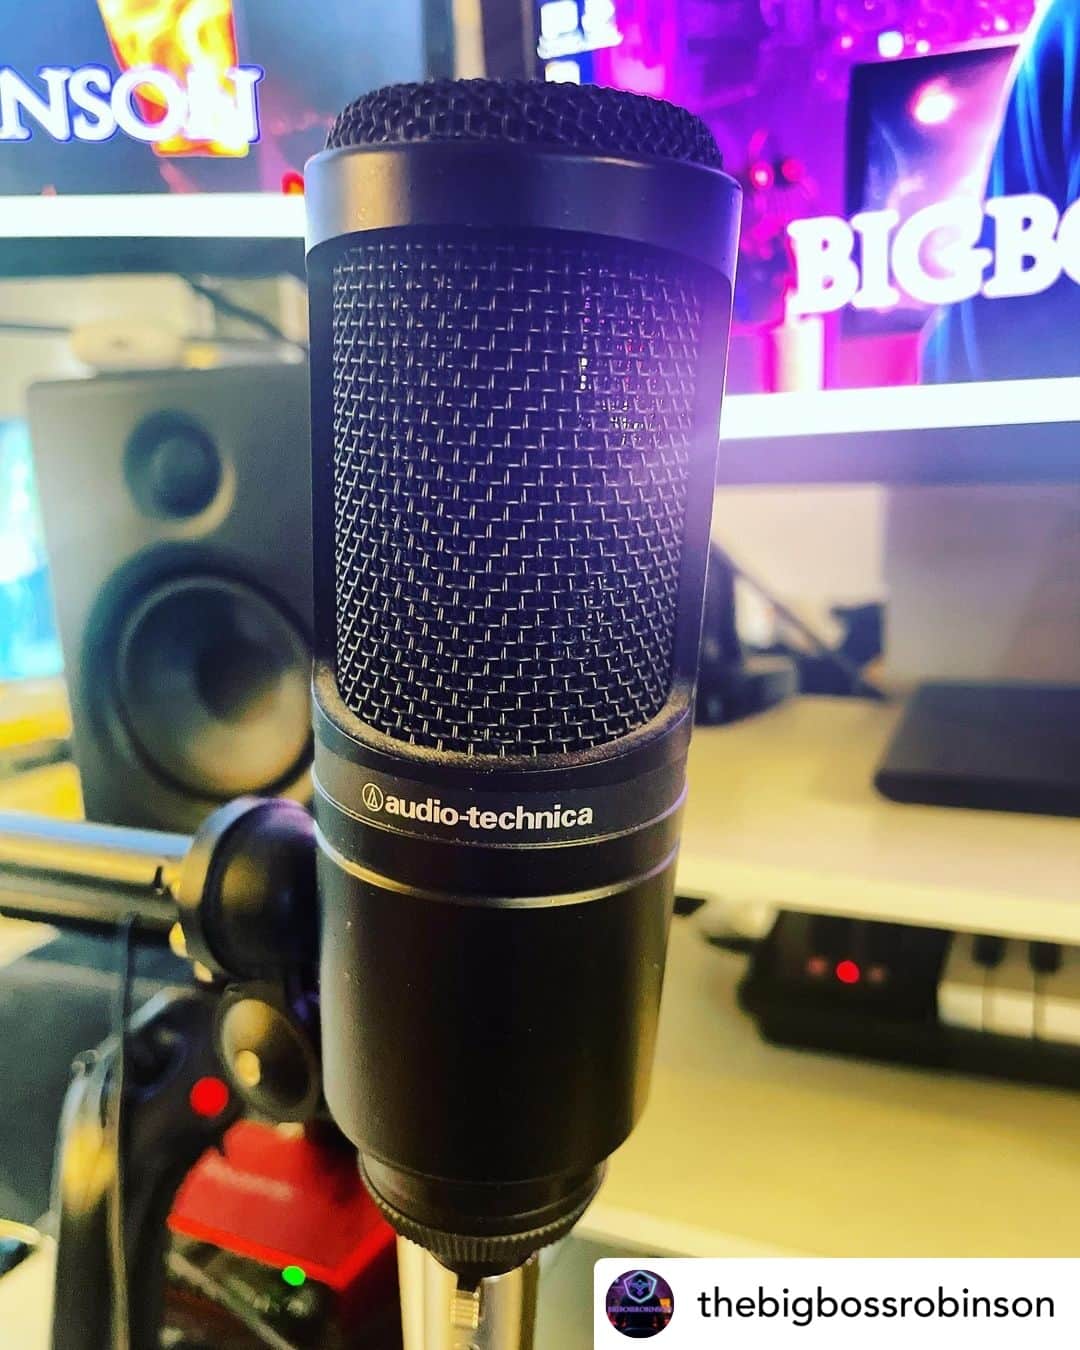 Audio-Technica USAのインスタグラム：「#FanPhotoFriday: The AT2020 - the mic that started it all. Thanks for sharing our microphone, @thebigbossrobinson!⁠ .⁠ .⁠ .⁠ #AudioTechnica #Microphone #RecordingGear #StudioGear #StudioMicrophone ⁠」